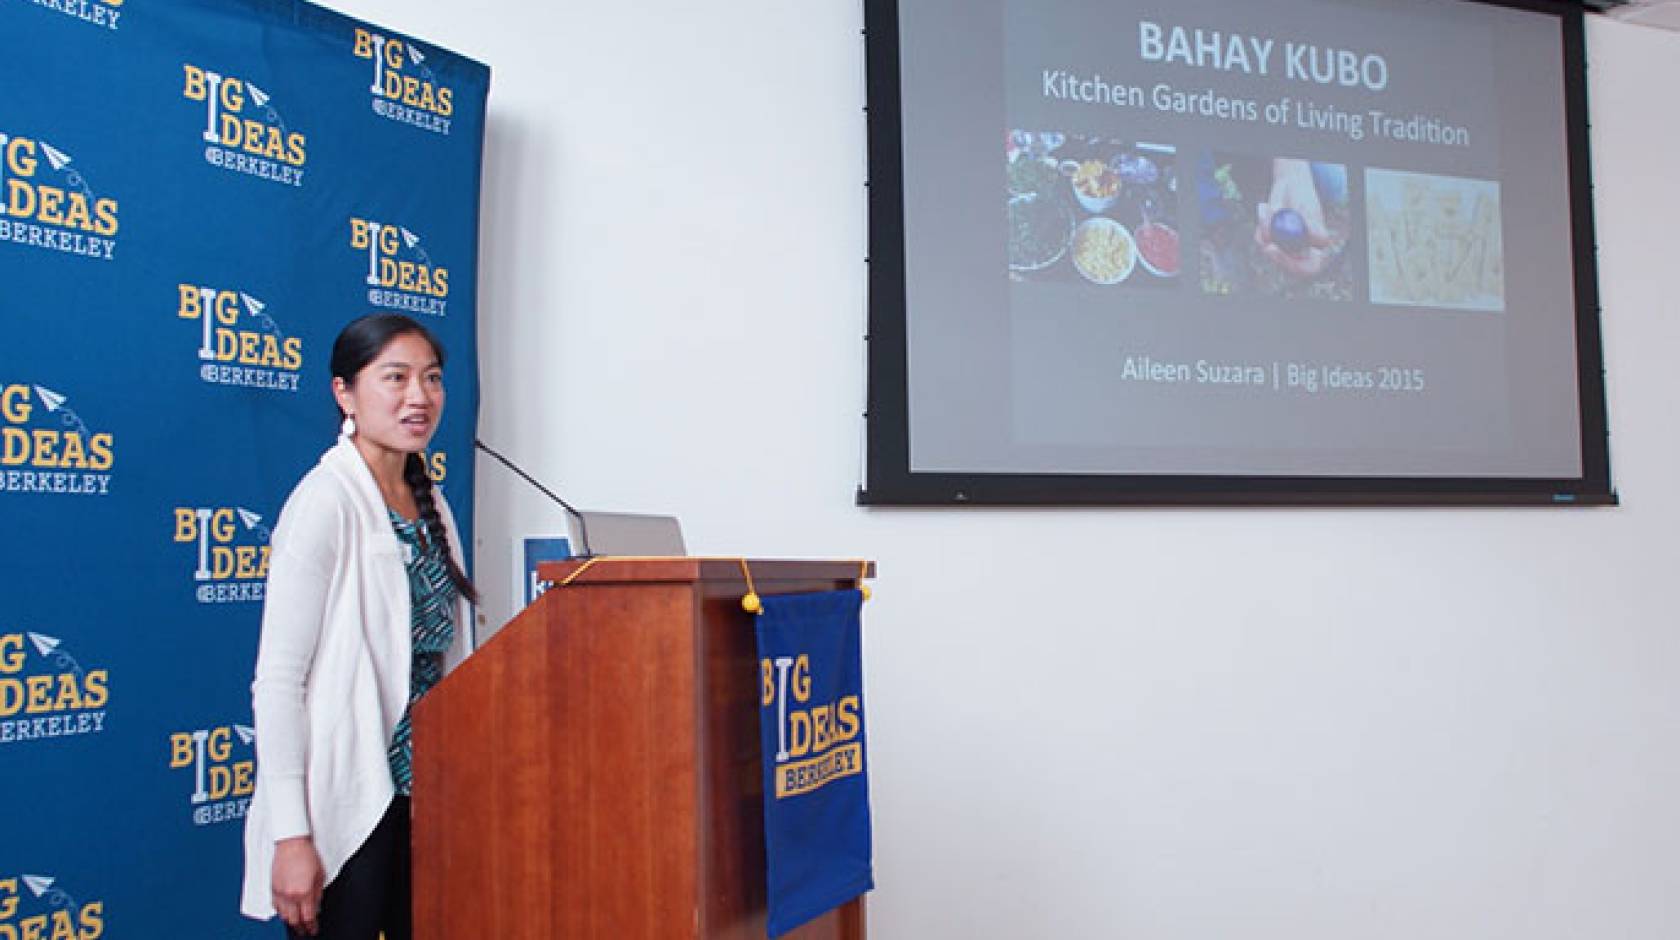 Aileen Suzara presents Bahay Kubo: Kitchen Gardens of Living Tradition at the Big Ideas 2015 Grand Prize Pitch Day